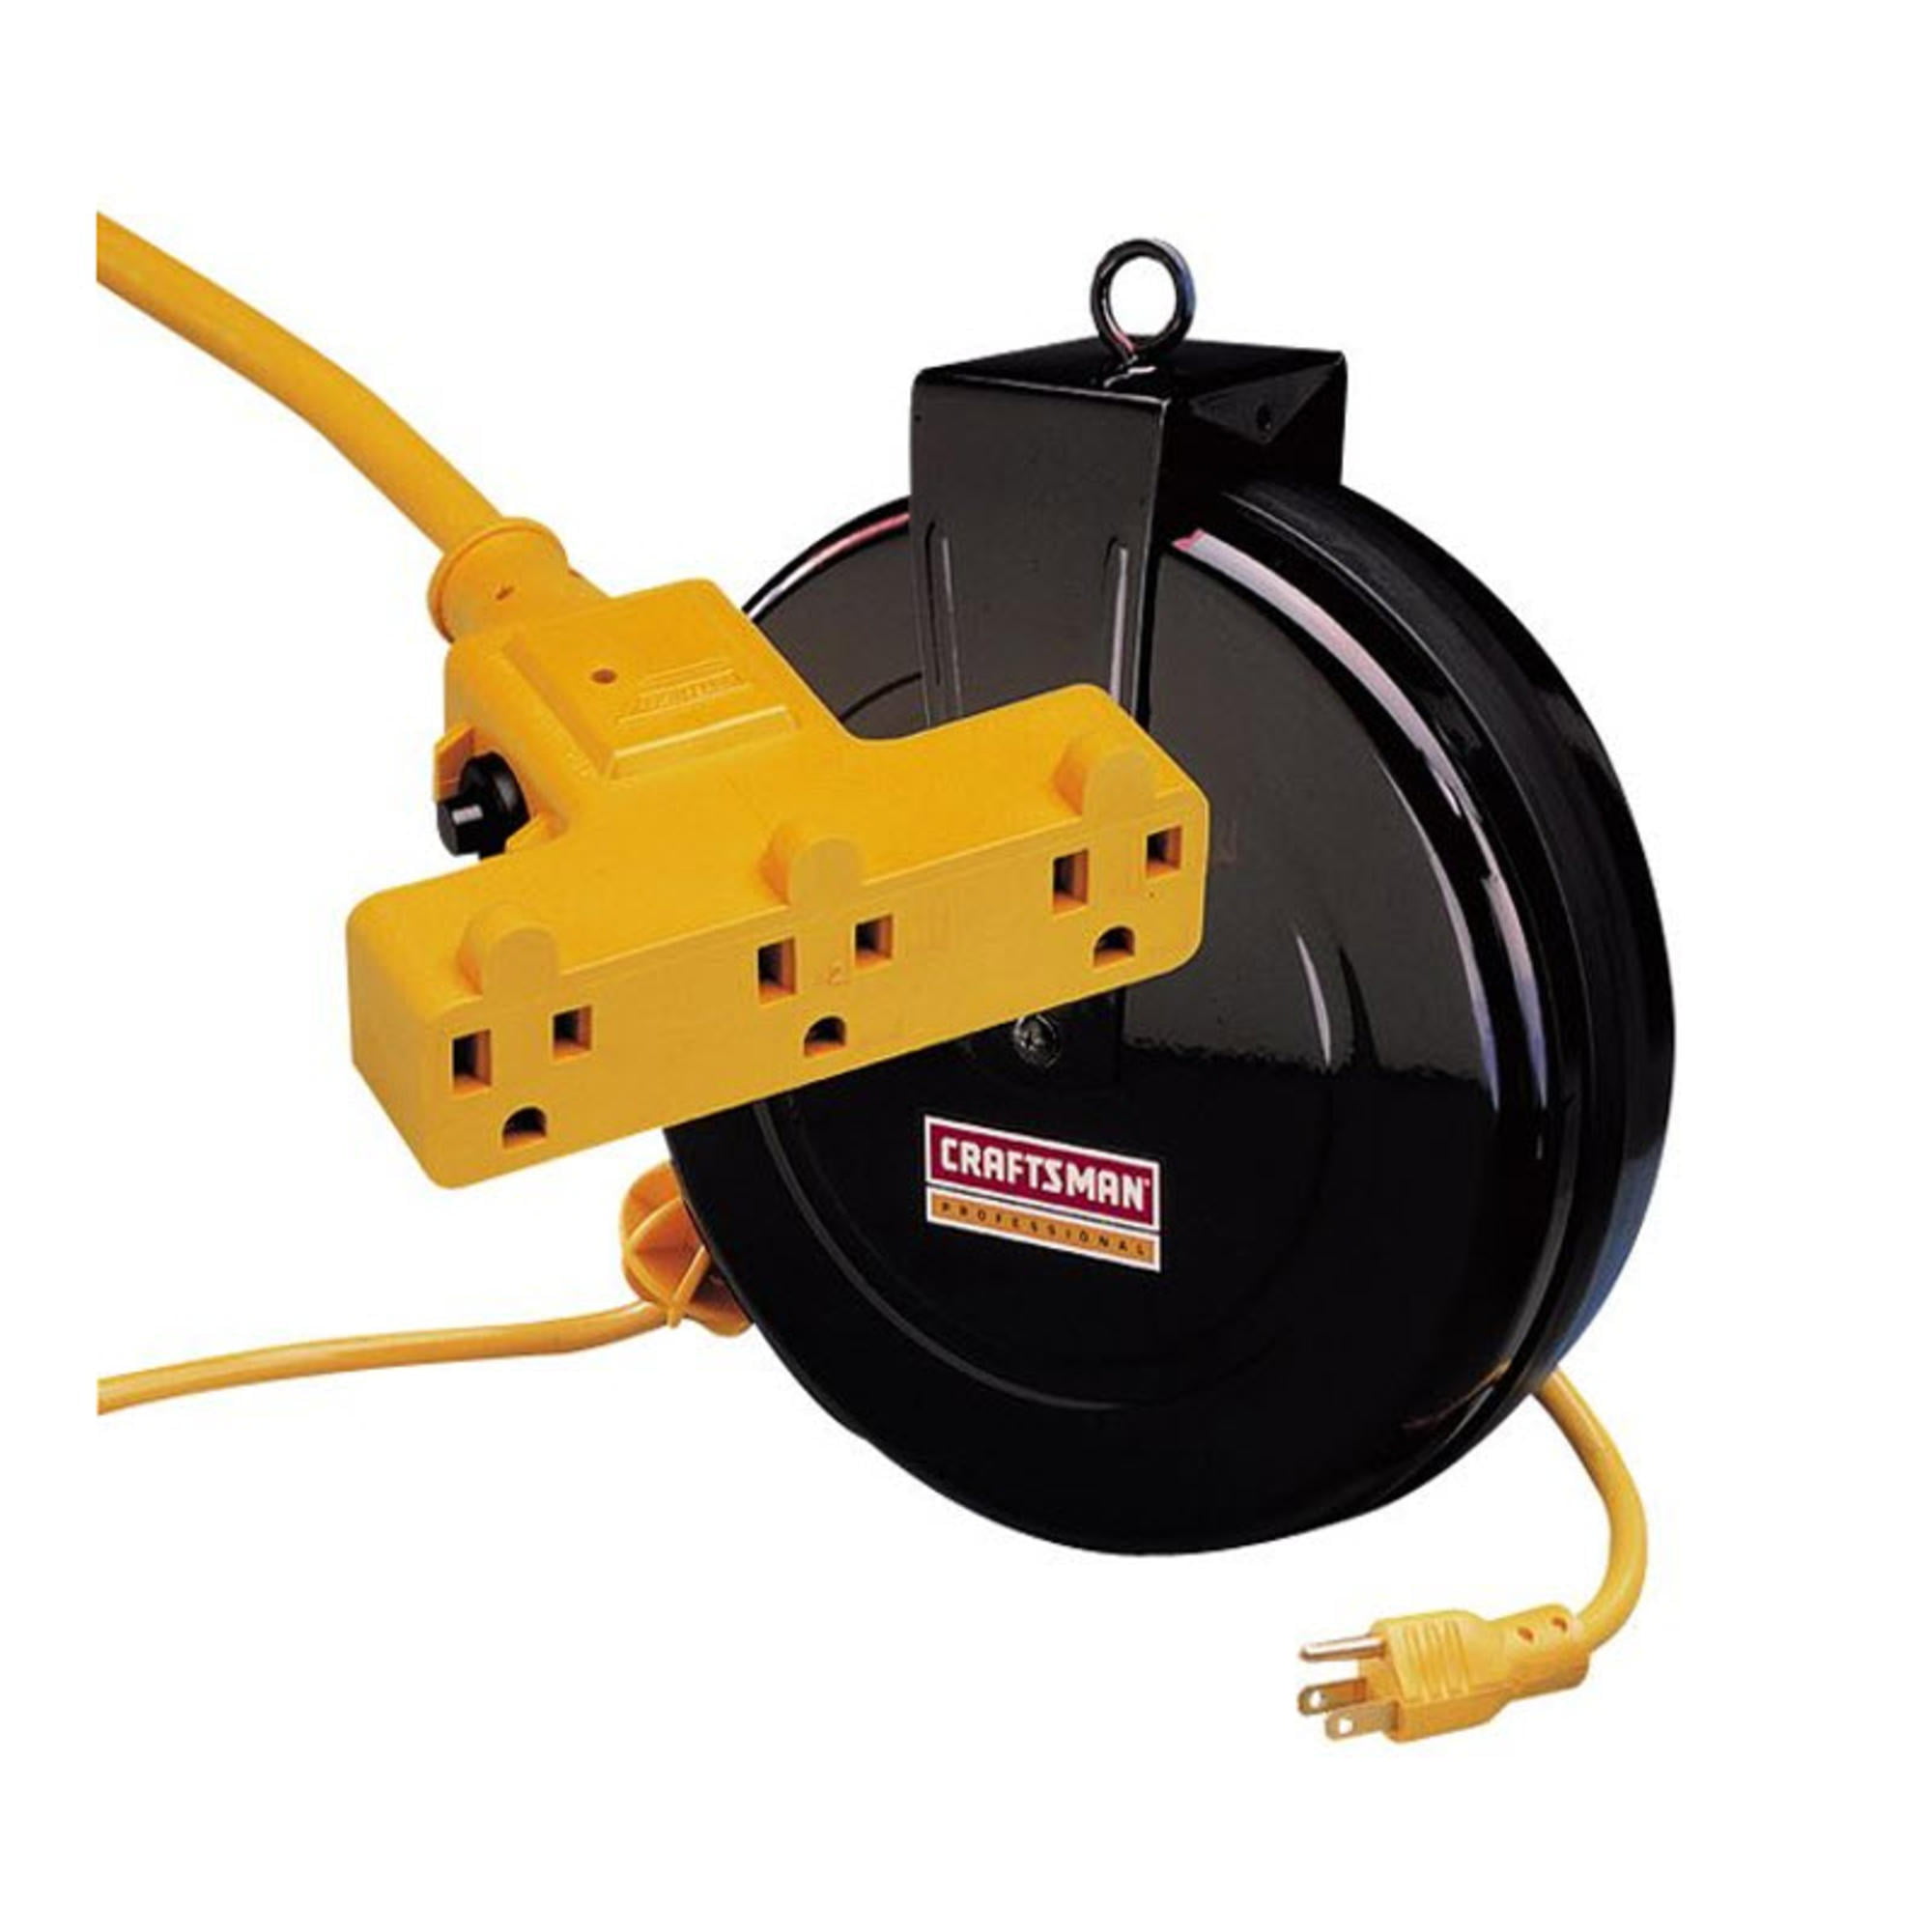 Alert ProReel 5000M-30GF-CB Heavy-Duty Retractable Cord Reel, 30' - 14/3  SJTW Cord, Tri-Tap Grounded Outlet with Power Light